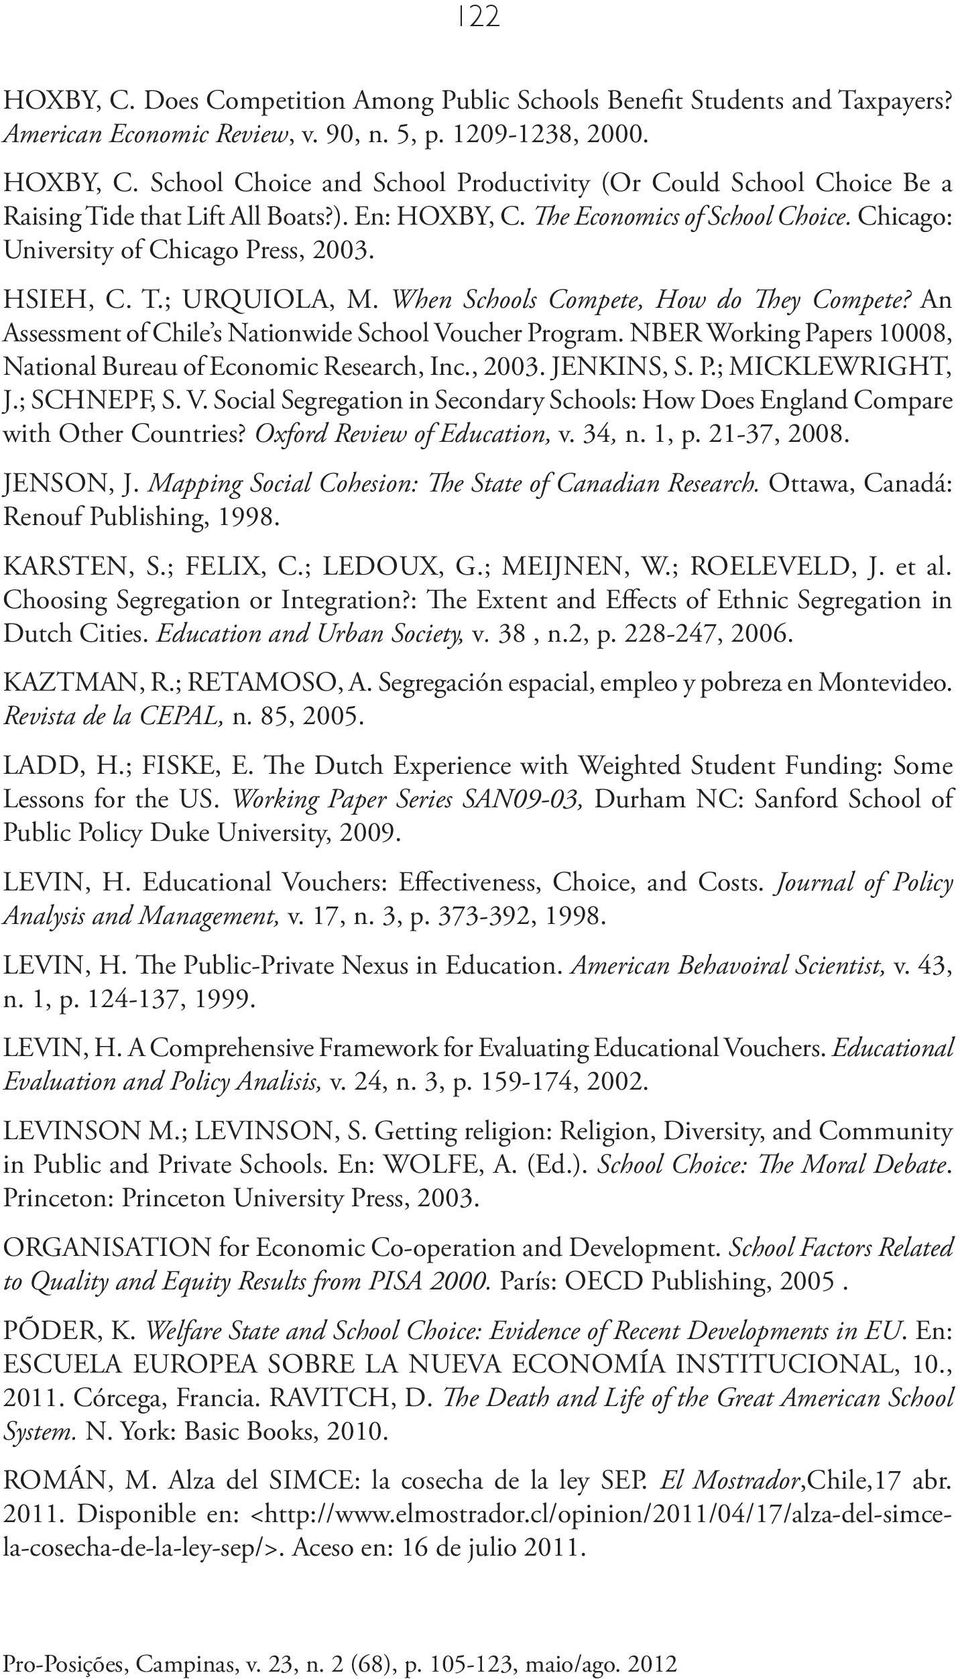 An Assessment of Chile s Nationwide School Voucher Program. NBER Working Papers 10008, National Bureau of Economic Research, Inc., 2003. JENKINS, S. P.; MICKLEWRIGHT, J.; SCHNEPF, S. V. Social Segregation in Secondary Schools: How Does England Compare with Other Countries?